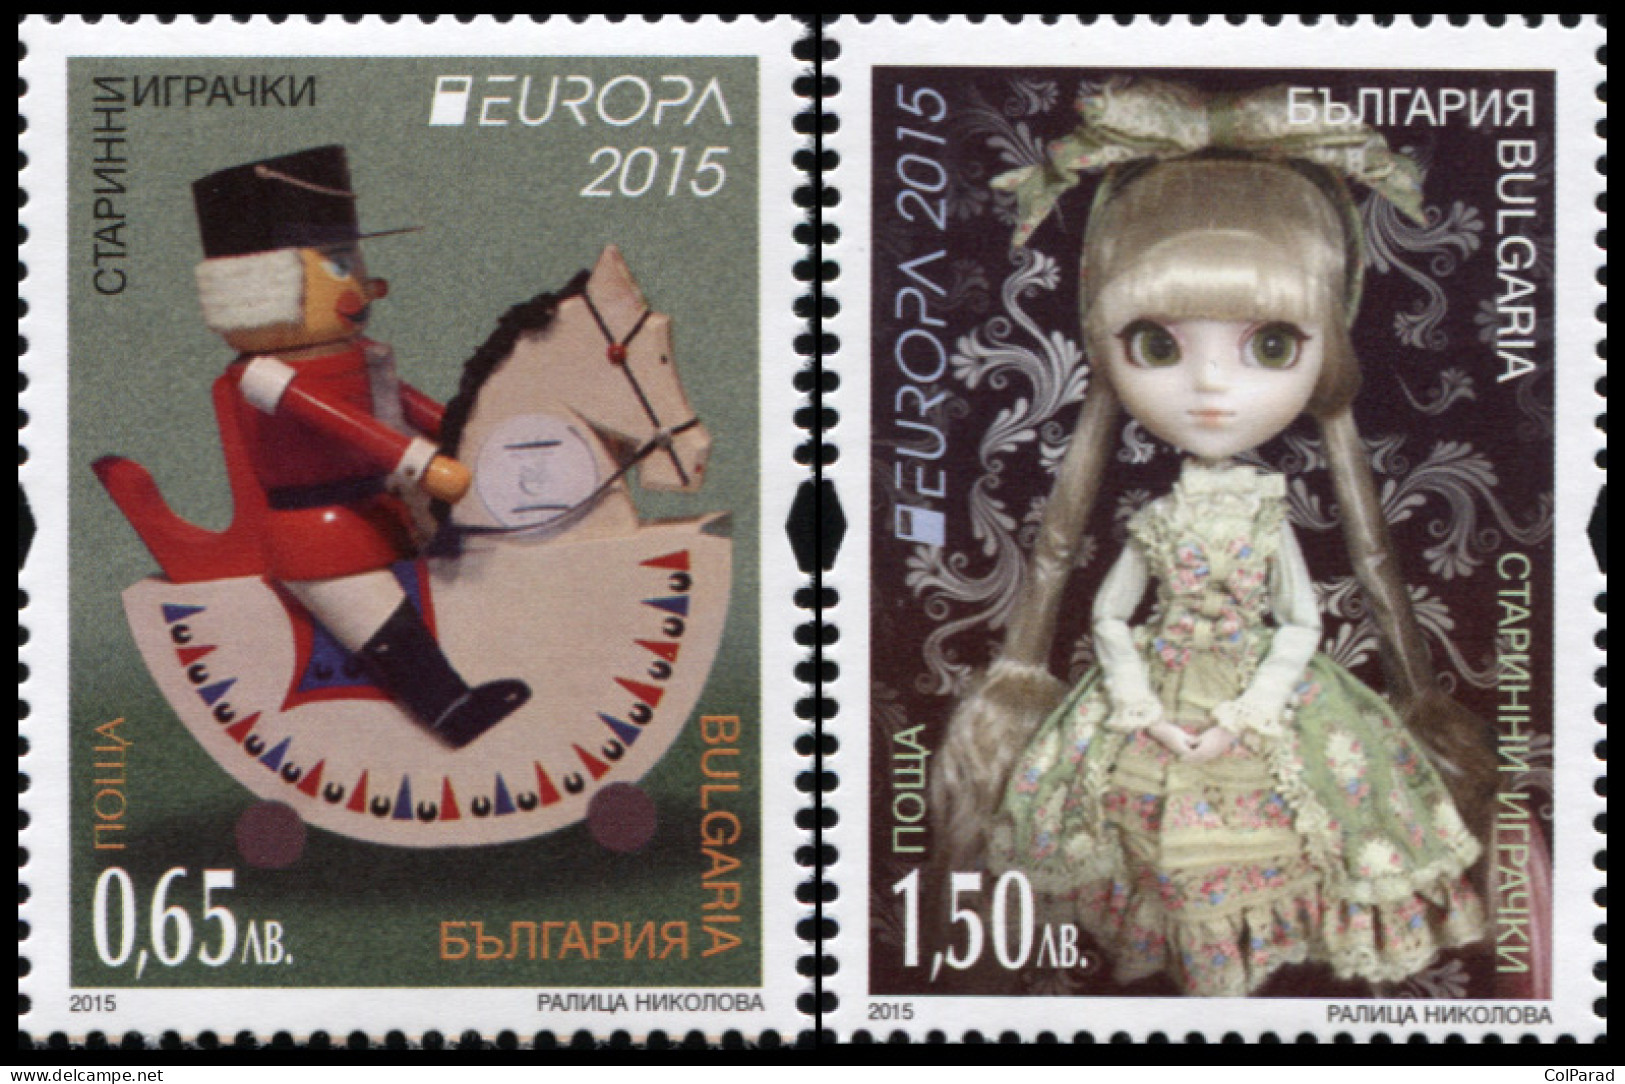 BULGARIA - 2015 - SET OF 2 STAMPS MNH ** - Old Toys - Neufs